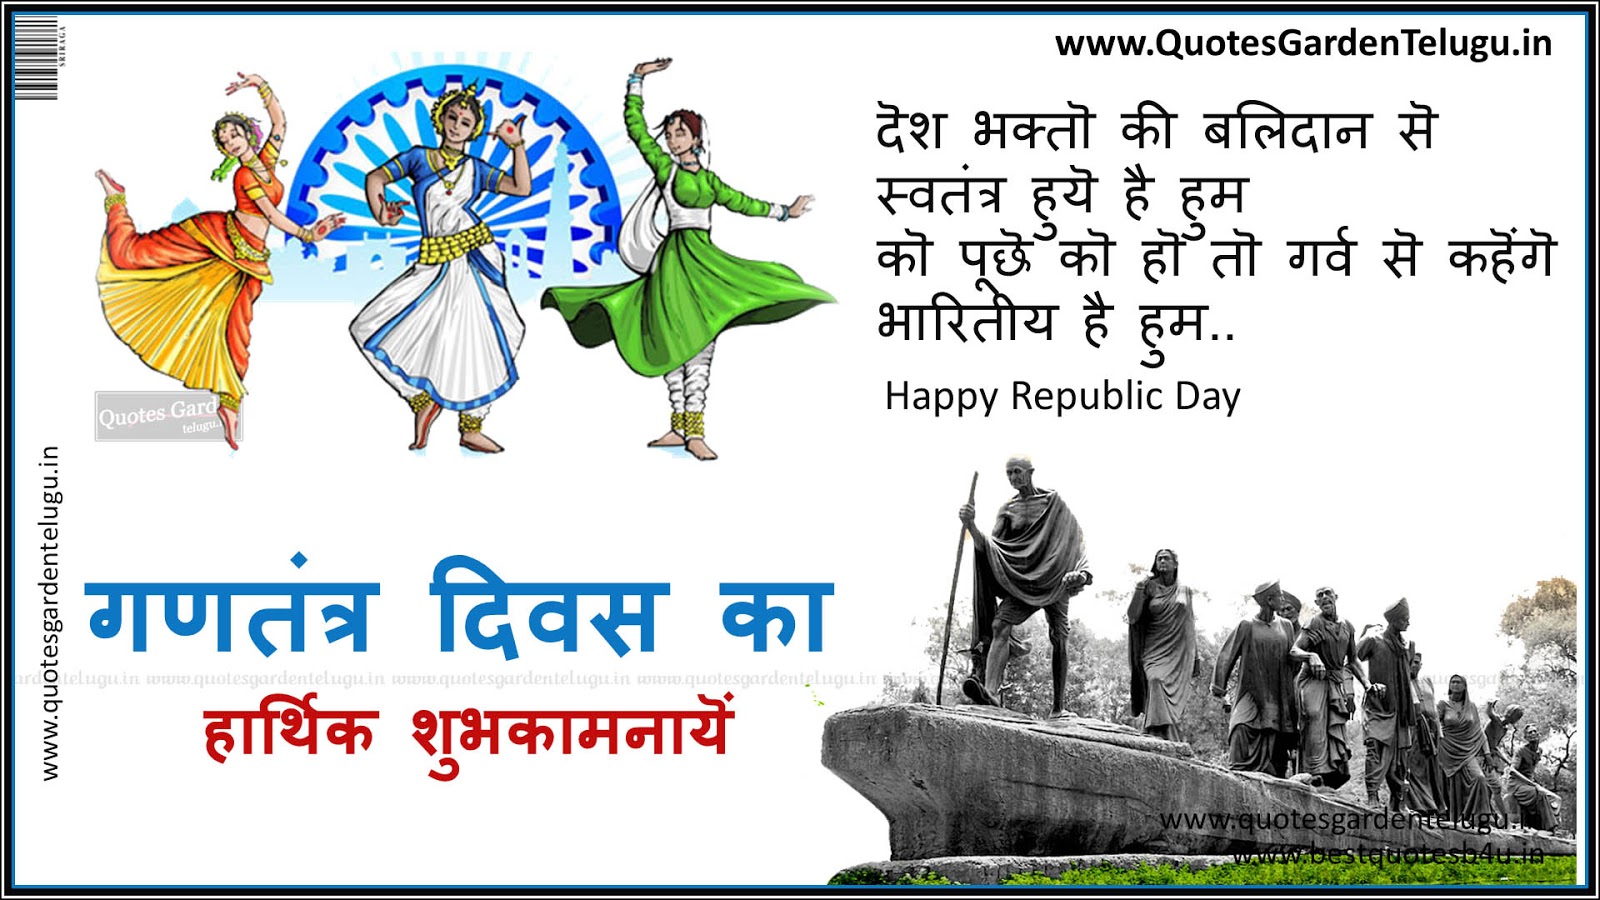  Best  Republicday greetings 2019 in Hindi  QUOTES  GARDEN 